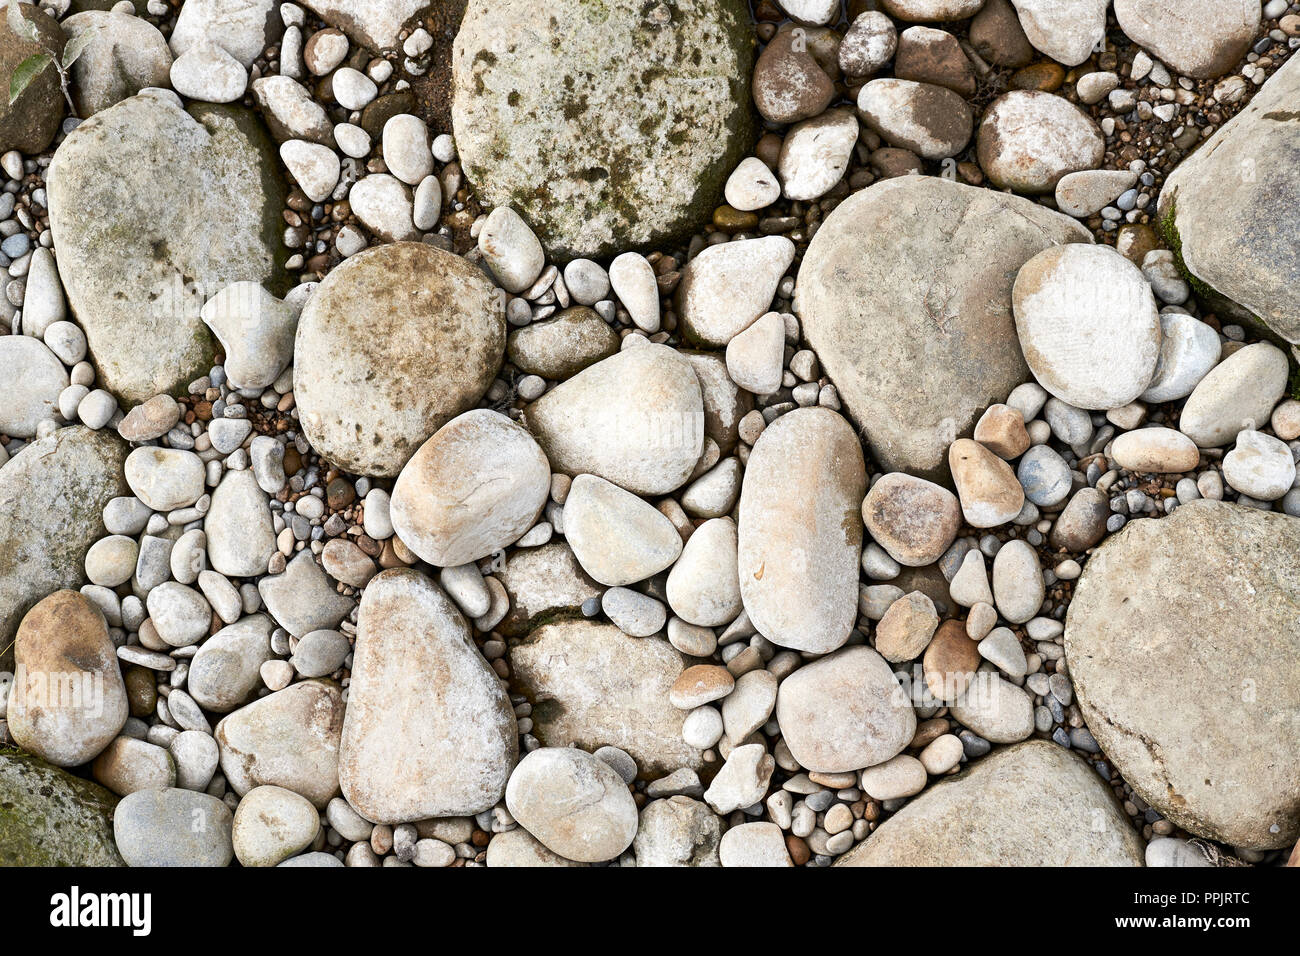 Riverbed pebbles exposed on the banks of the River Wharfe, Bolton Abbey, North Yorkshire, UK. Stock Photo